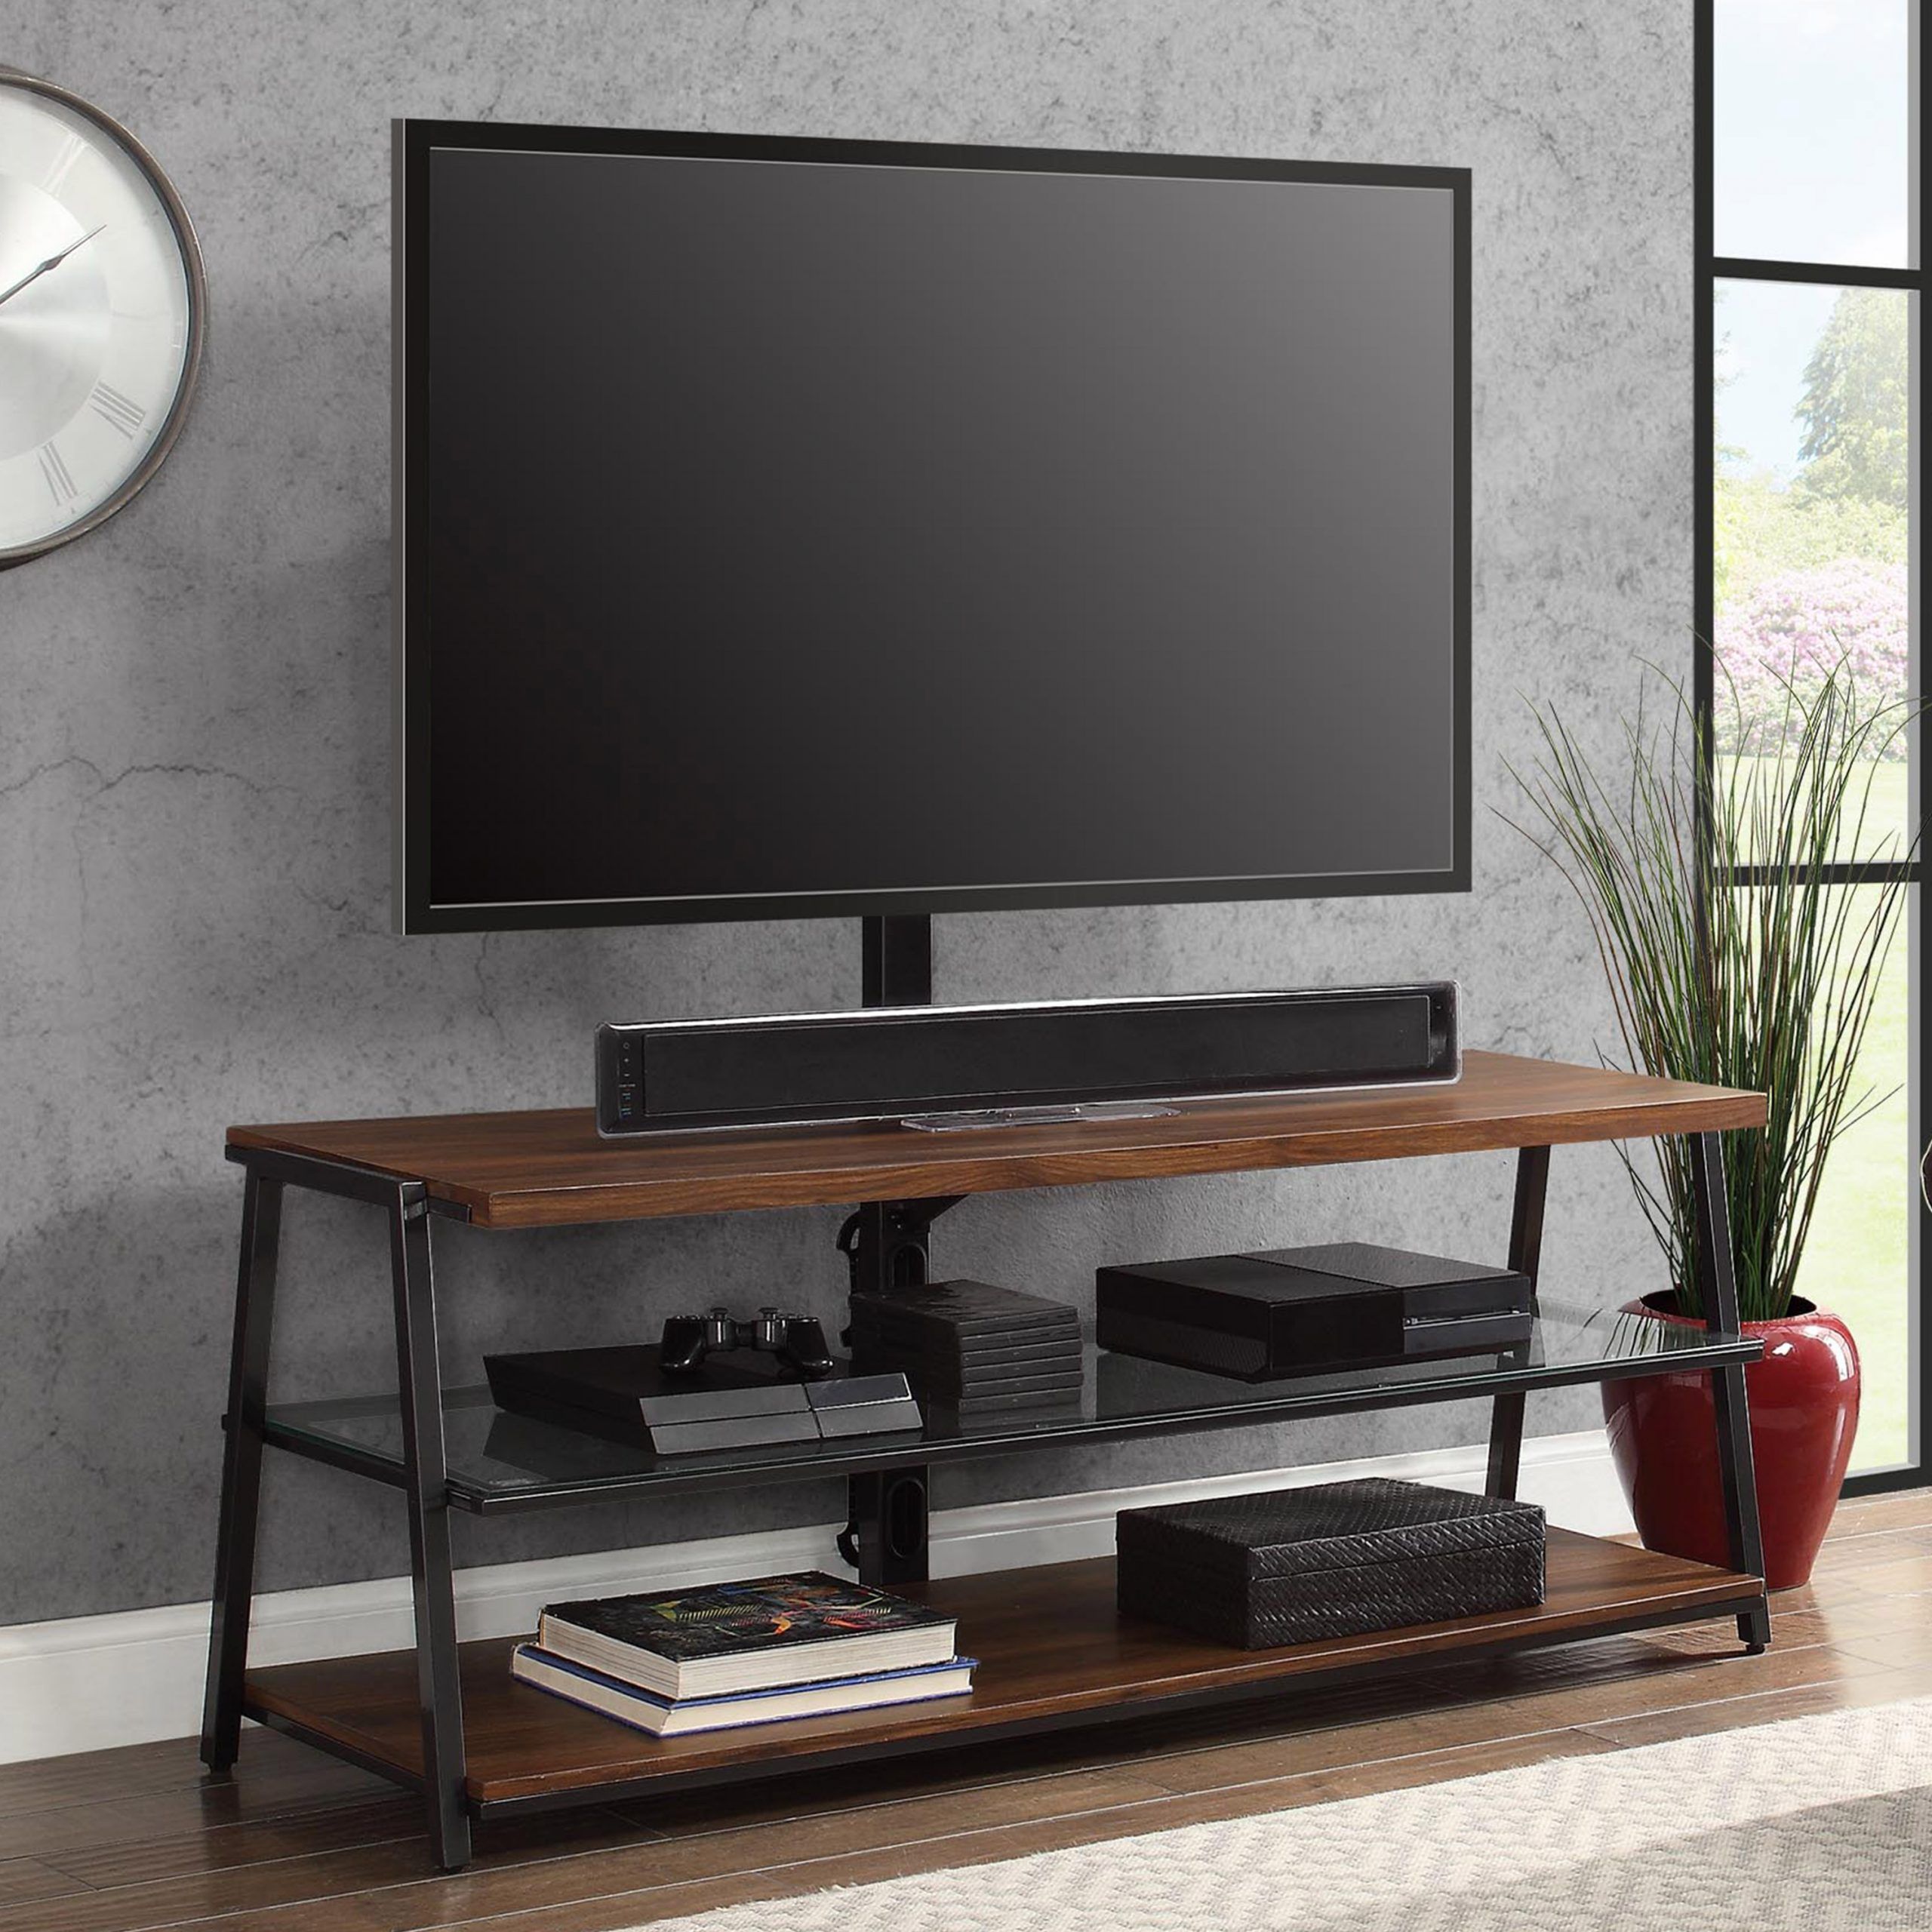 Mainstays Arris 3 In 1 Tv Stand For Televisions Up To 70 Pertaining To Most Up To Date Mainstays Arris 3 In 1 Tv Stands In Canyon Walnut Finish (Photo 3 of 10)